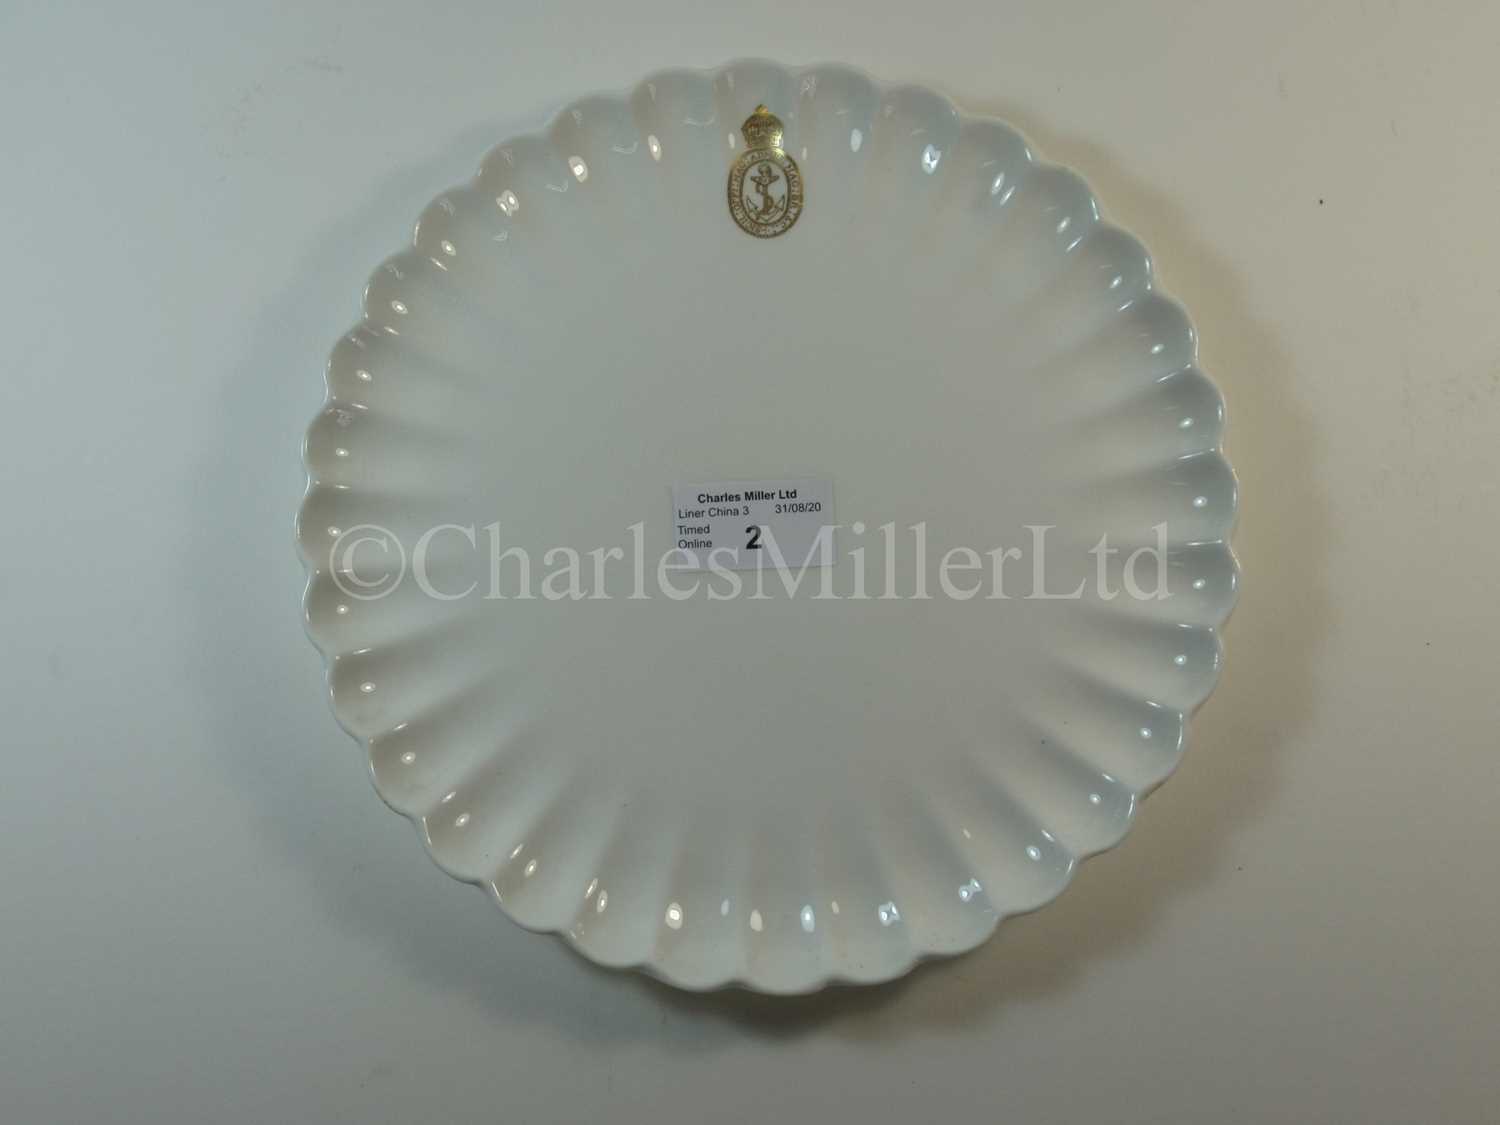 Lot 2 - An Admiralty scalloped side plate